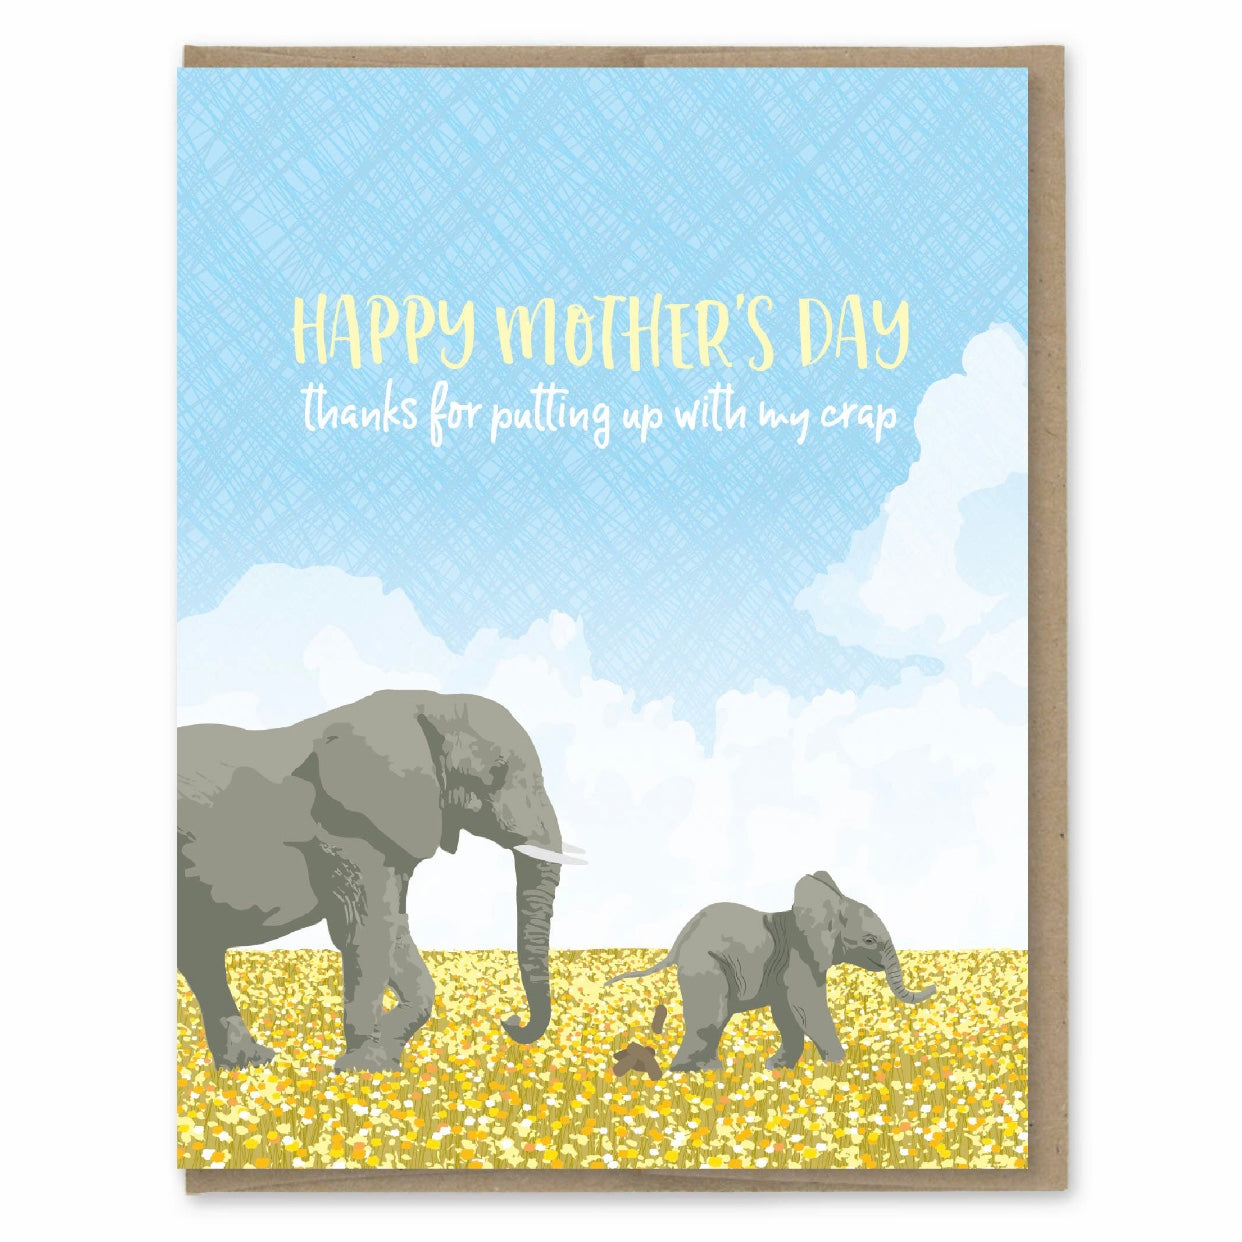 Happy mothers day card